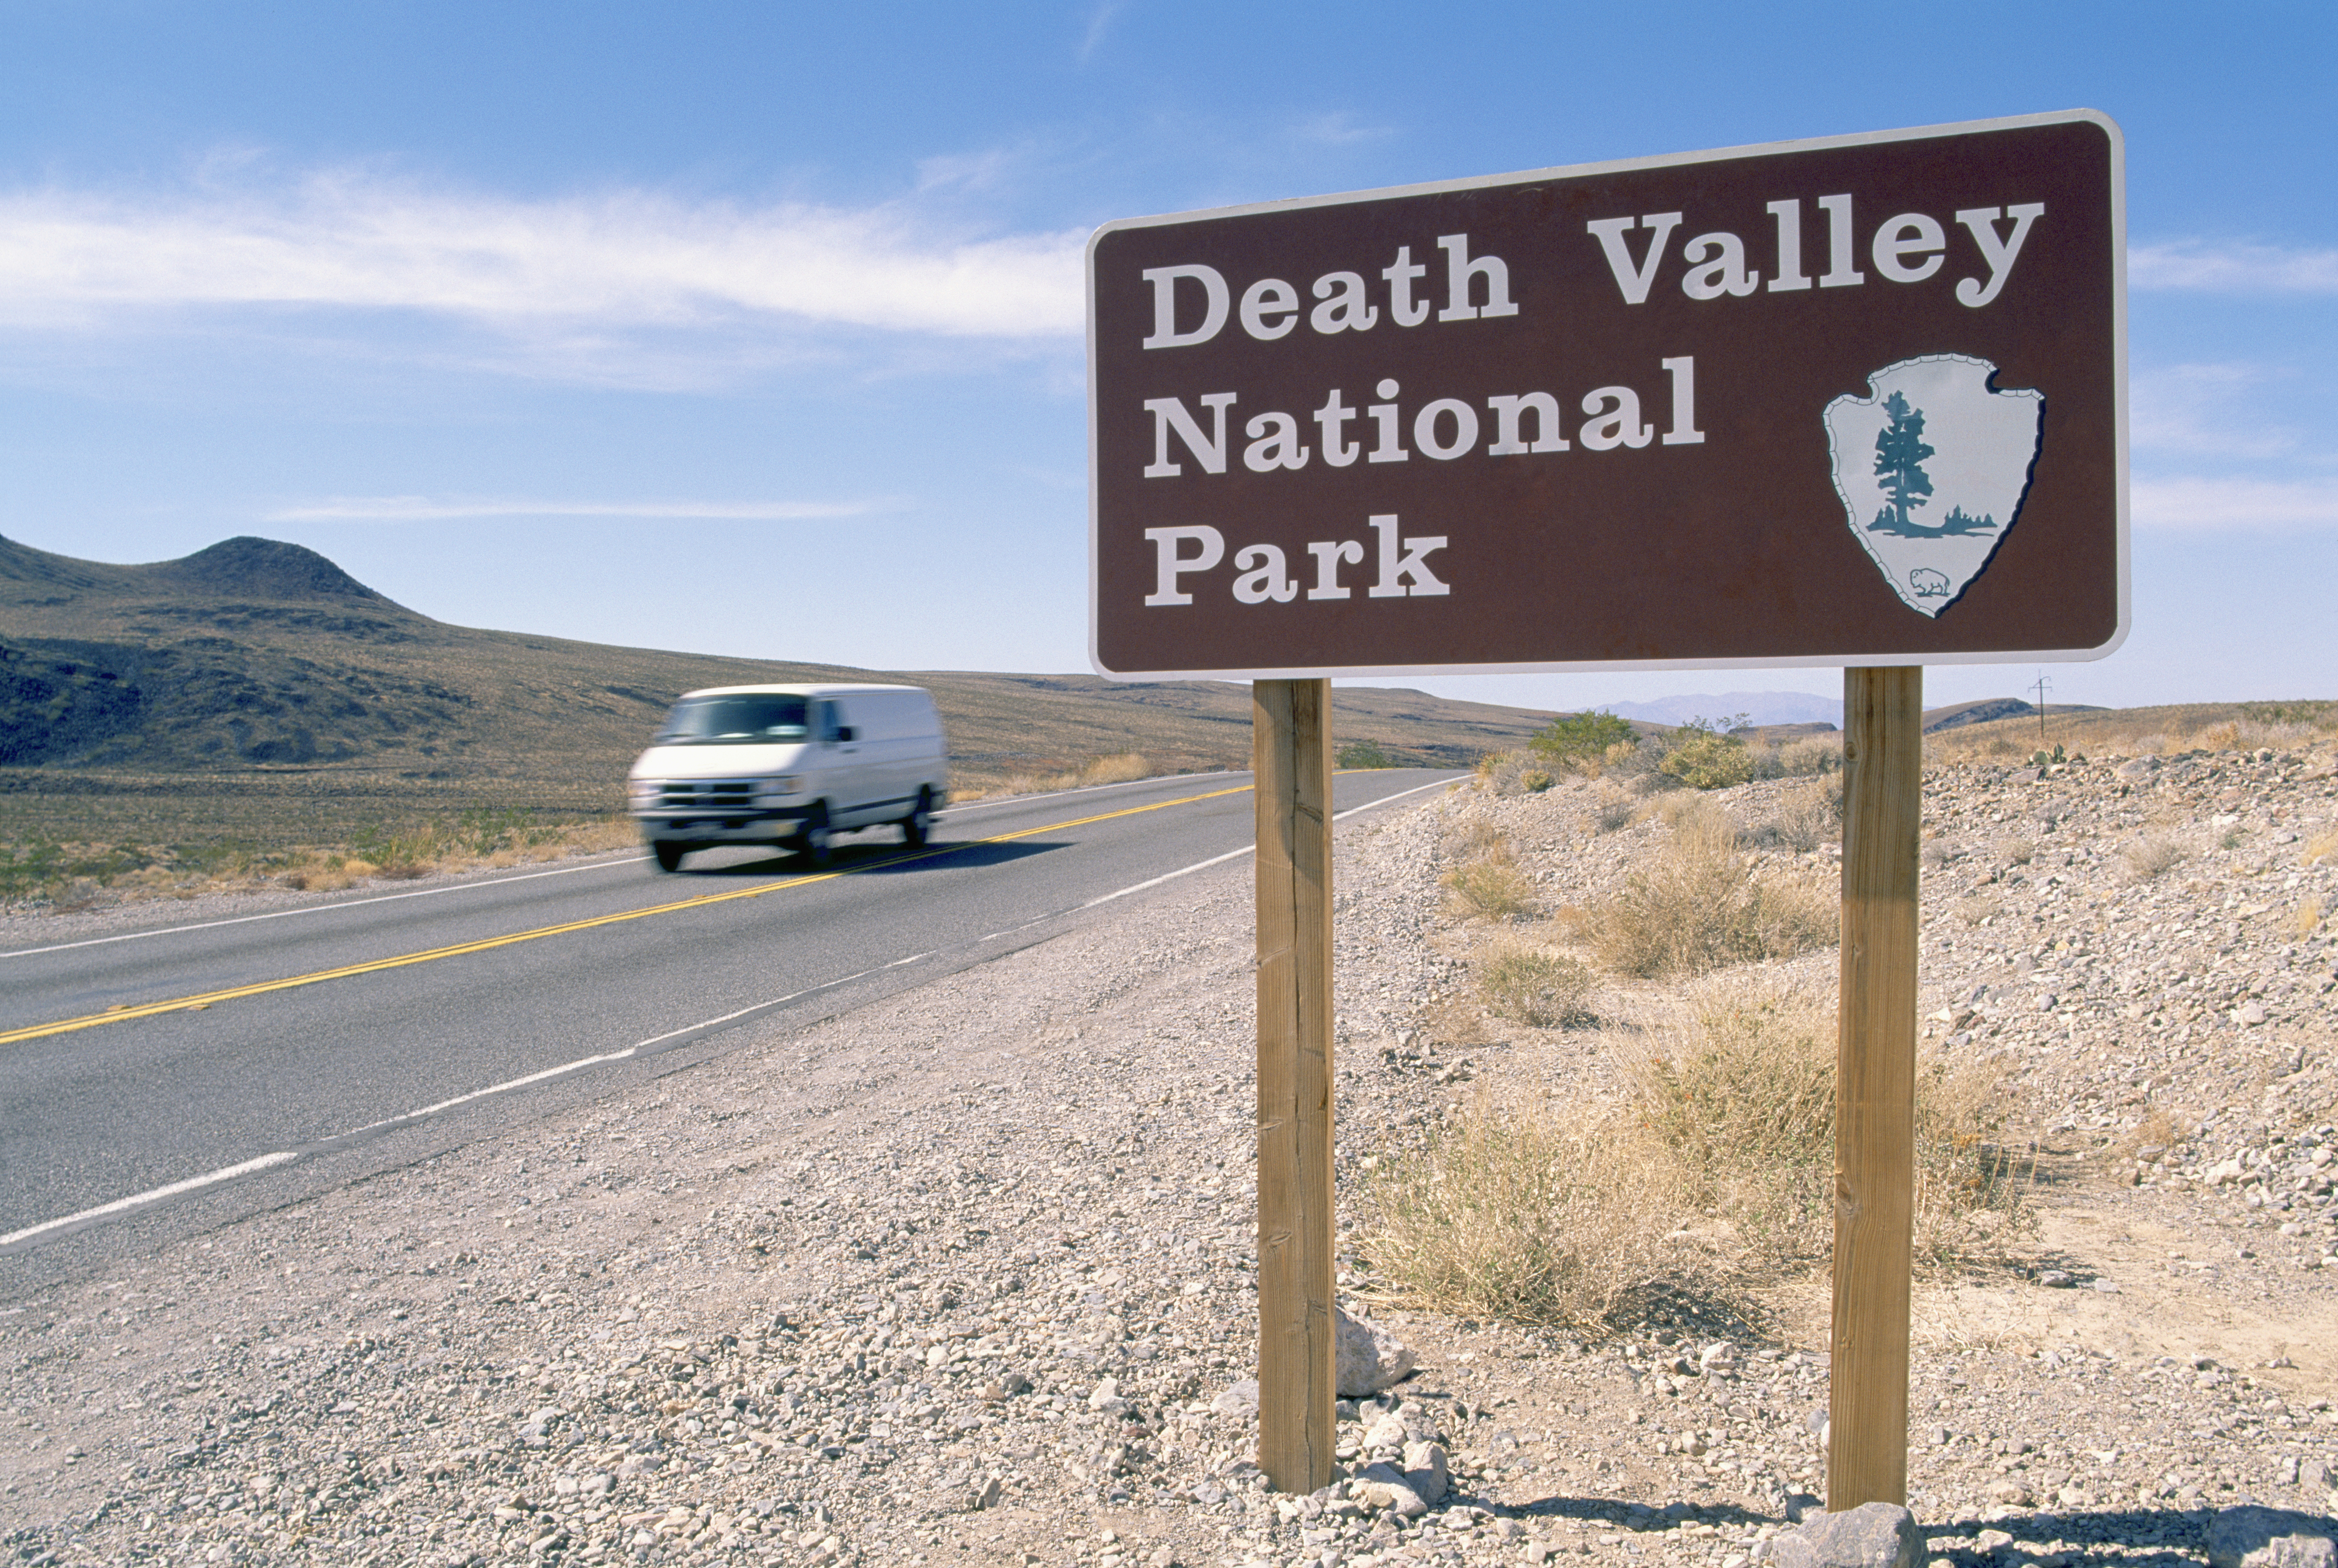 Sign for Death Valley National Park beside a road with a passing vehicle